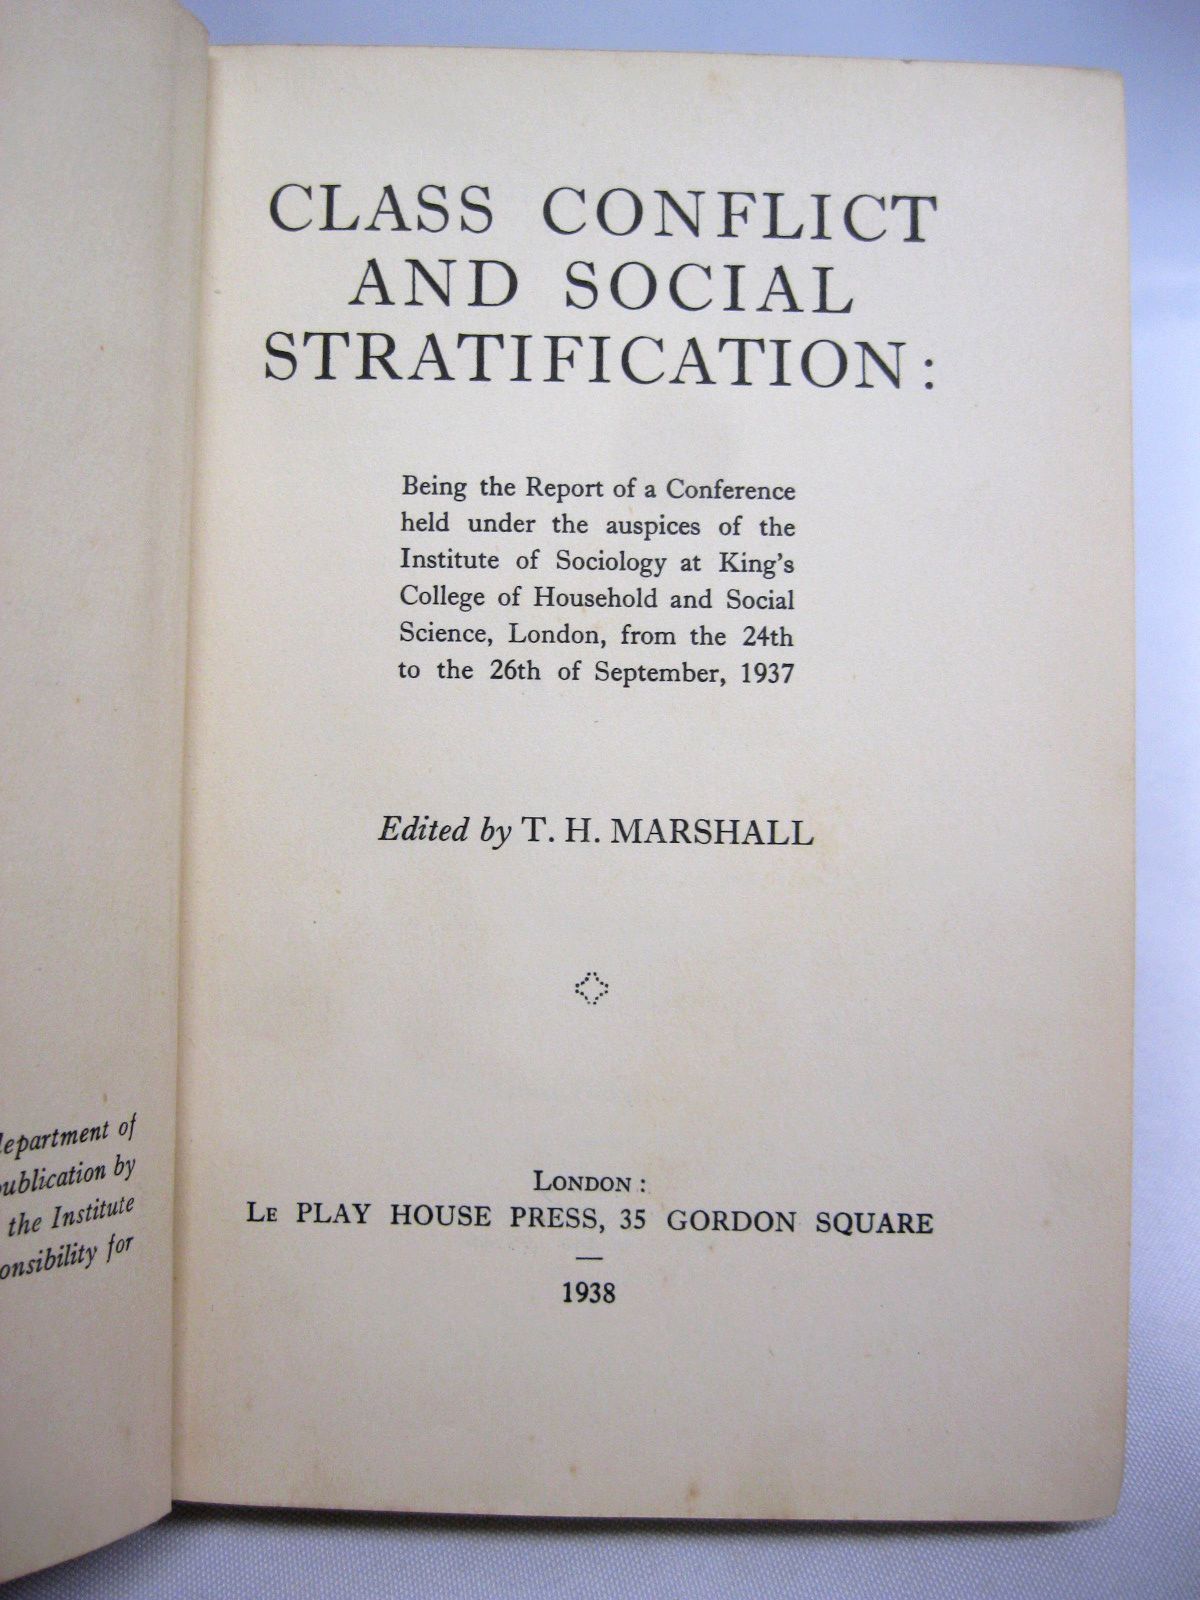 Class Conflict & Social Stratification by T.H. Marshall